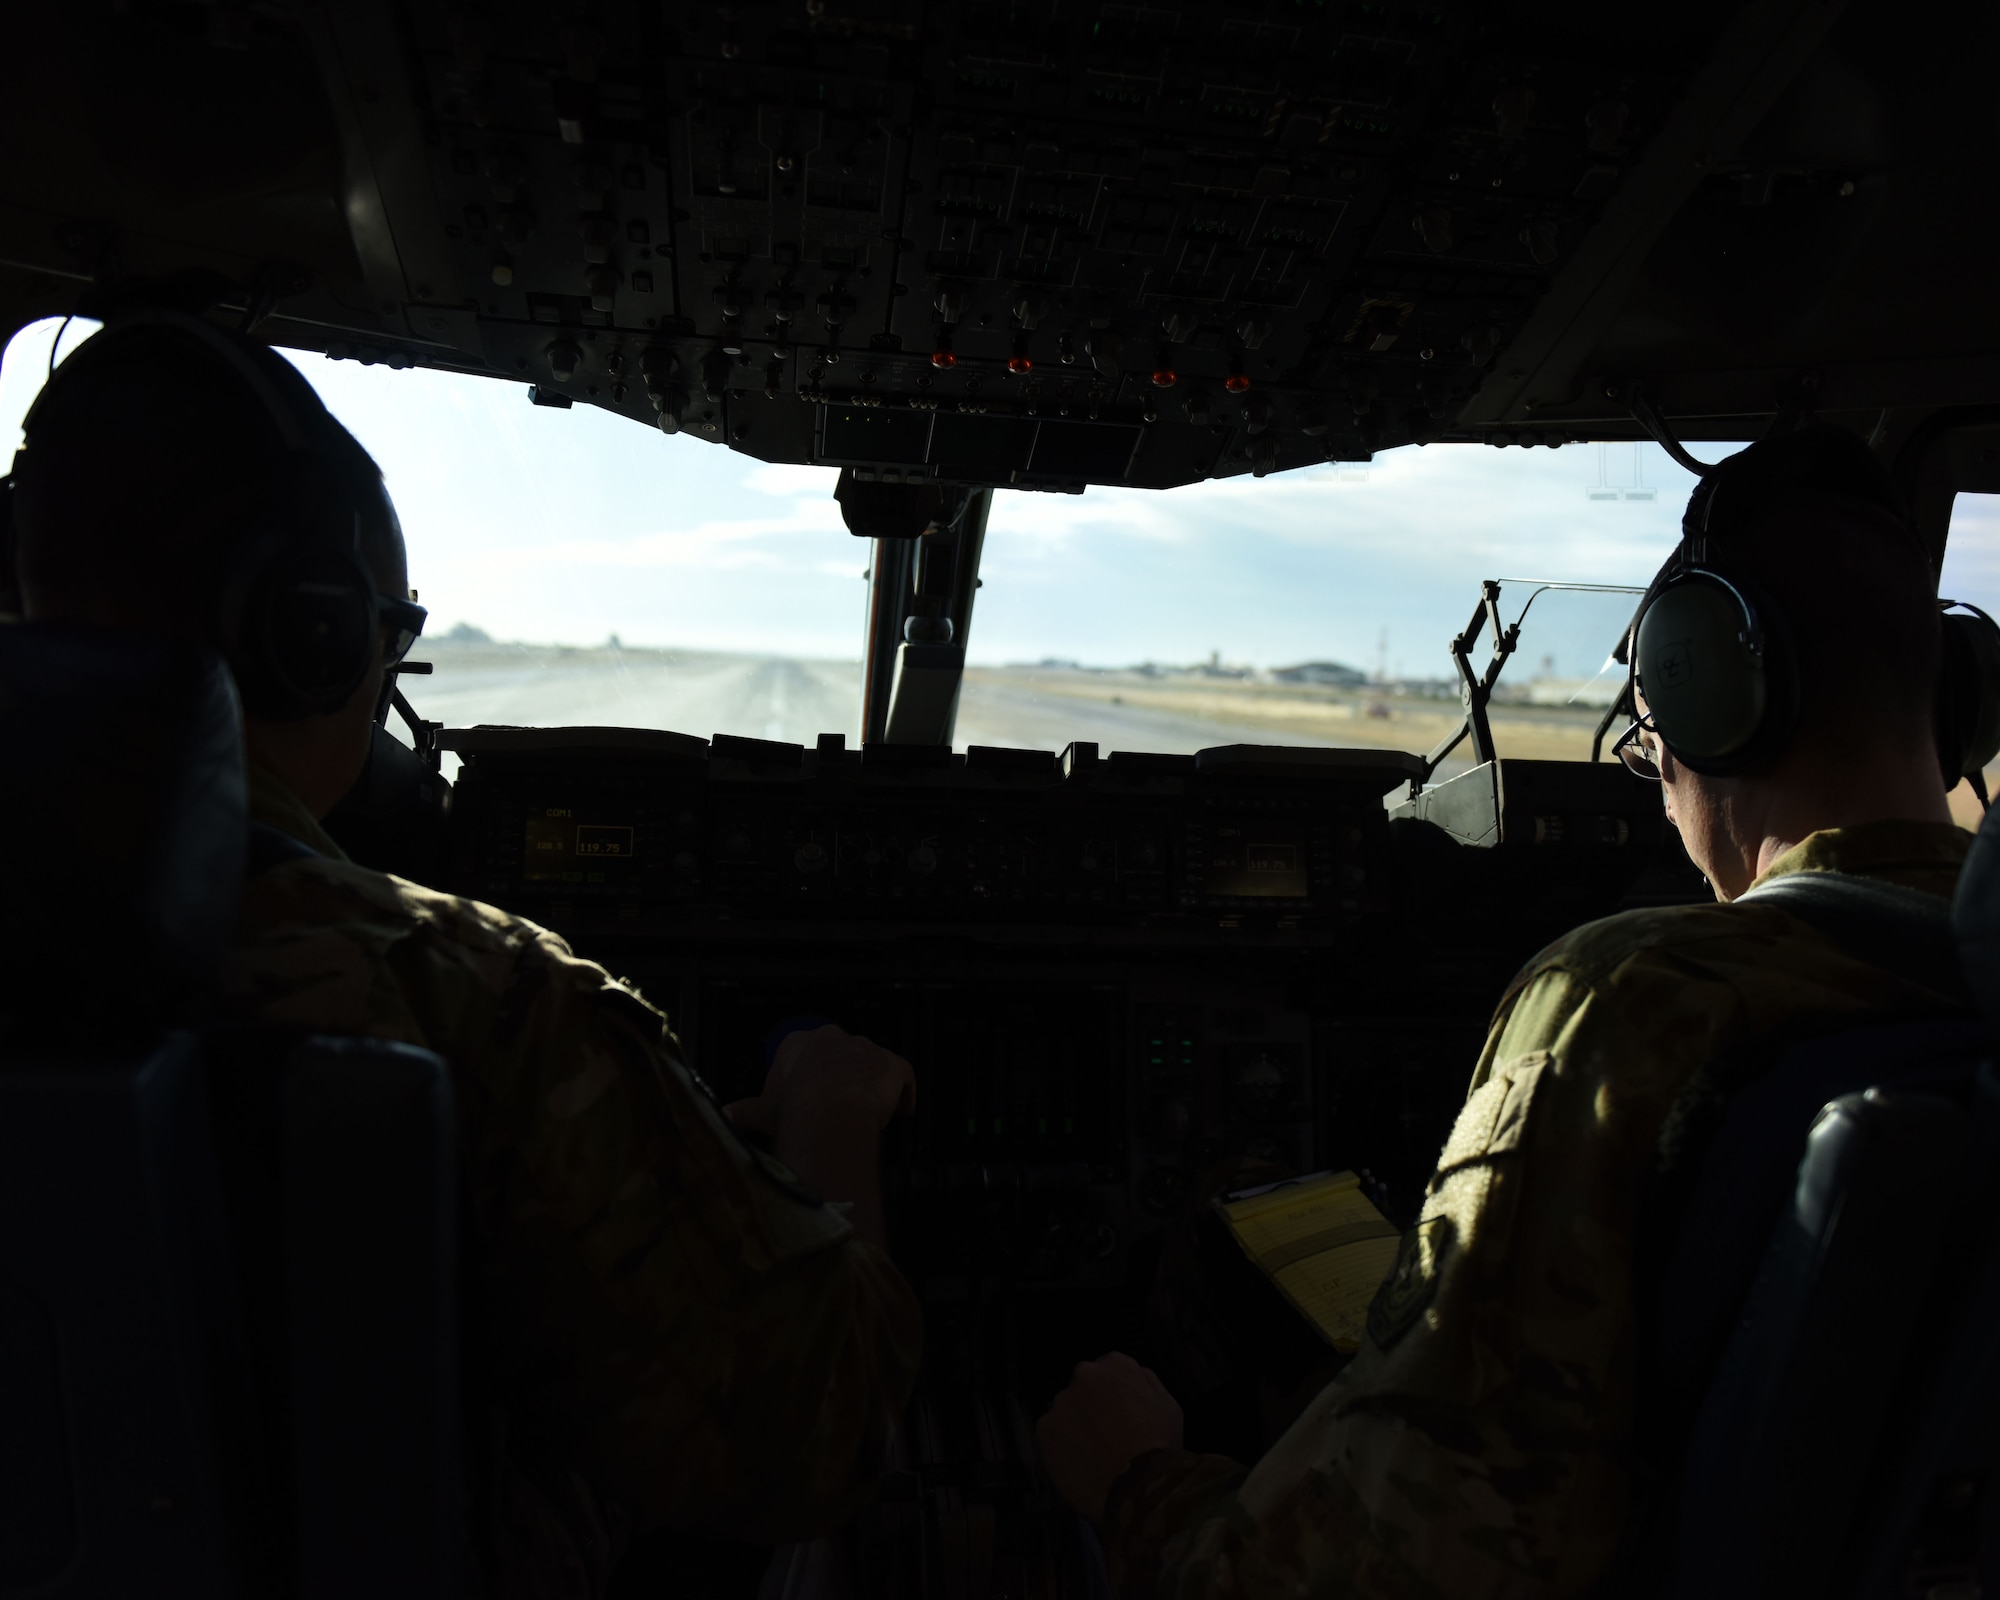 U.S. Air Force Maj. Robert Gates, left, and Capt. Justin Poole, both 21st Airlift Squadron pilots, prepare to take-off in a C-17 Globemaster III May 19, 2019, at Rota Naval Air Station, Spain. The C-17 is capable of rapid strategic delivery of troops and cargo anywhere in the world. (U.S. Air Force photo by 2nd Lt. R. Michael Longoria)